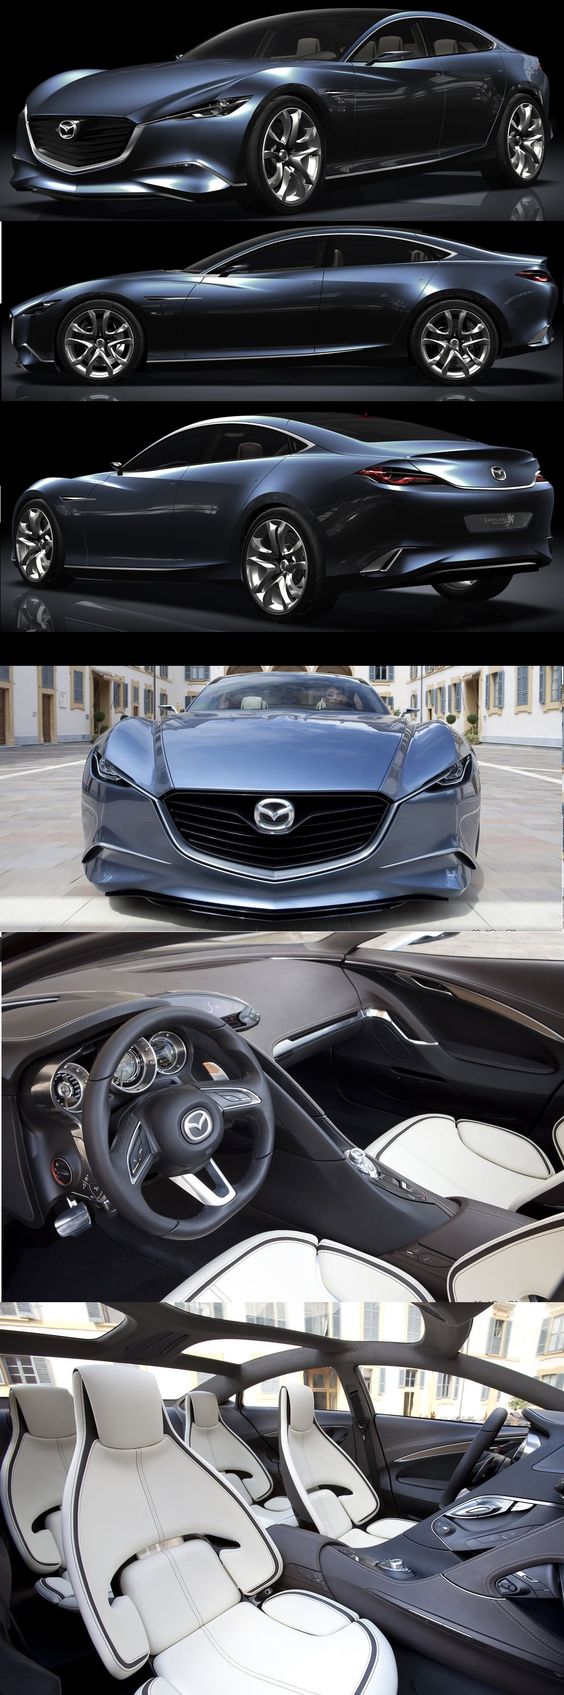 AUTOMAKERS NAVIGATE AN EVOLVING MARKET WITH CHANGING EXPECTATIONS - Mazda Shinari Concept